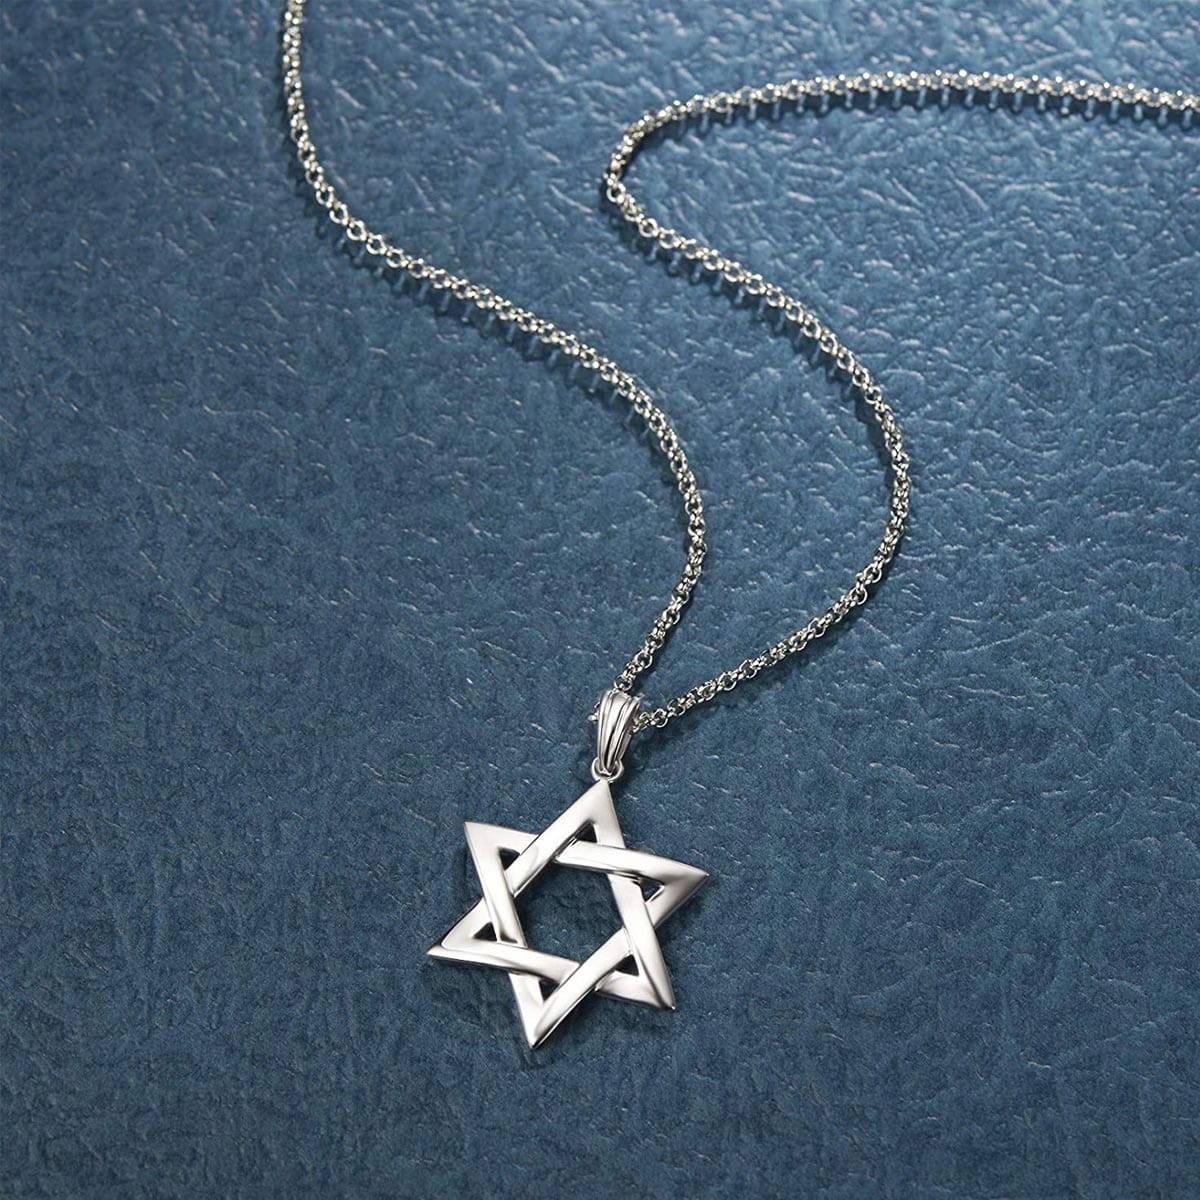 Star of David necklace with 20 inch long Chain